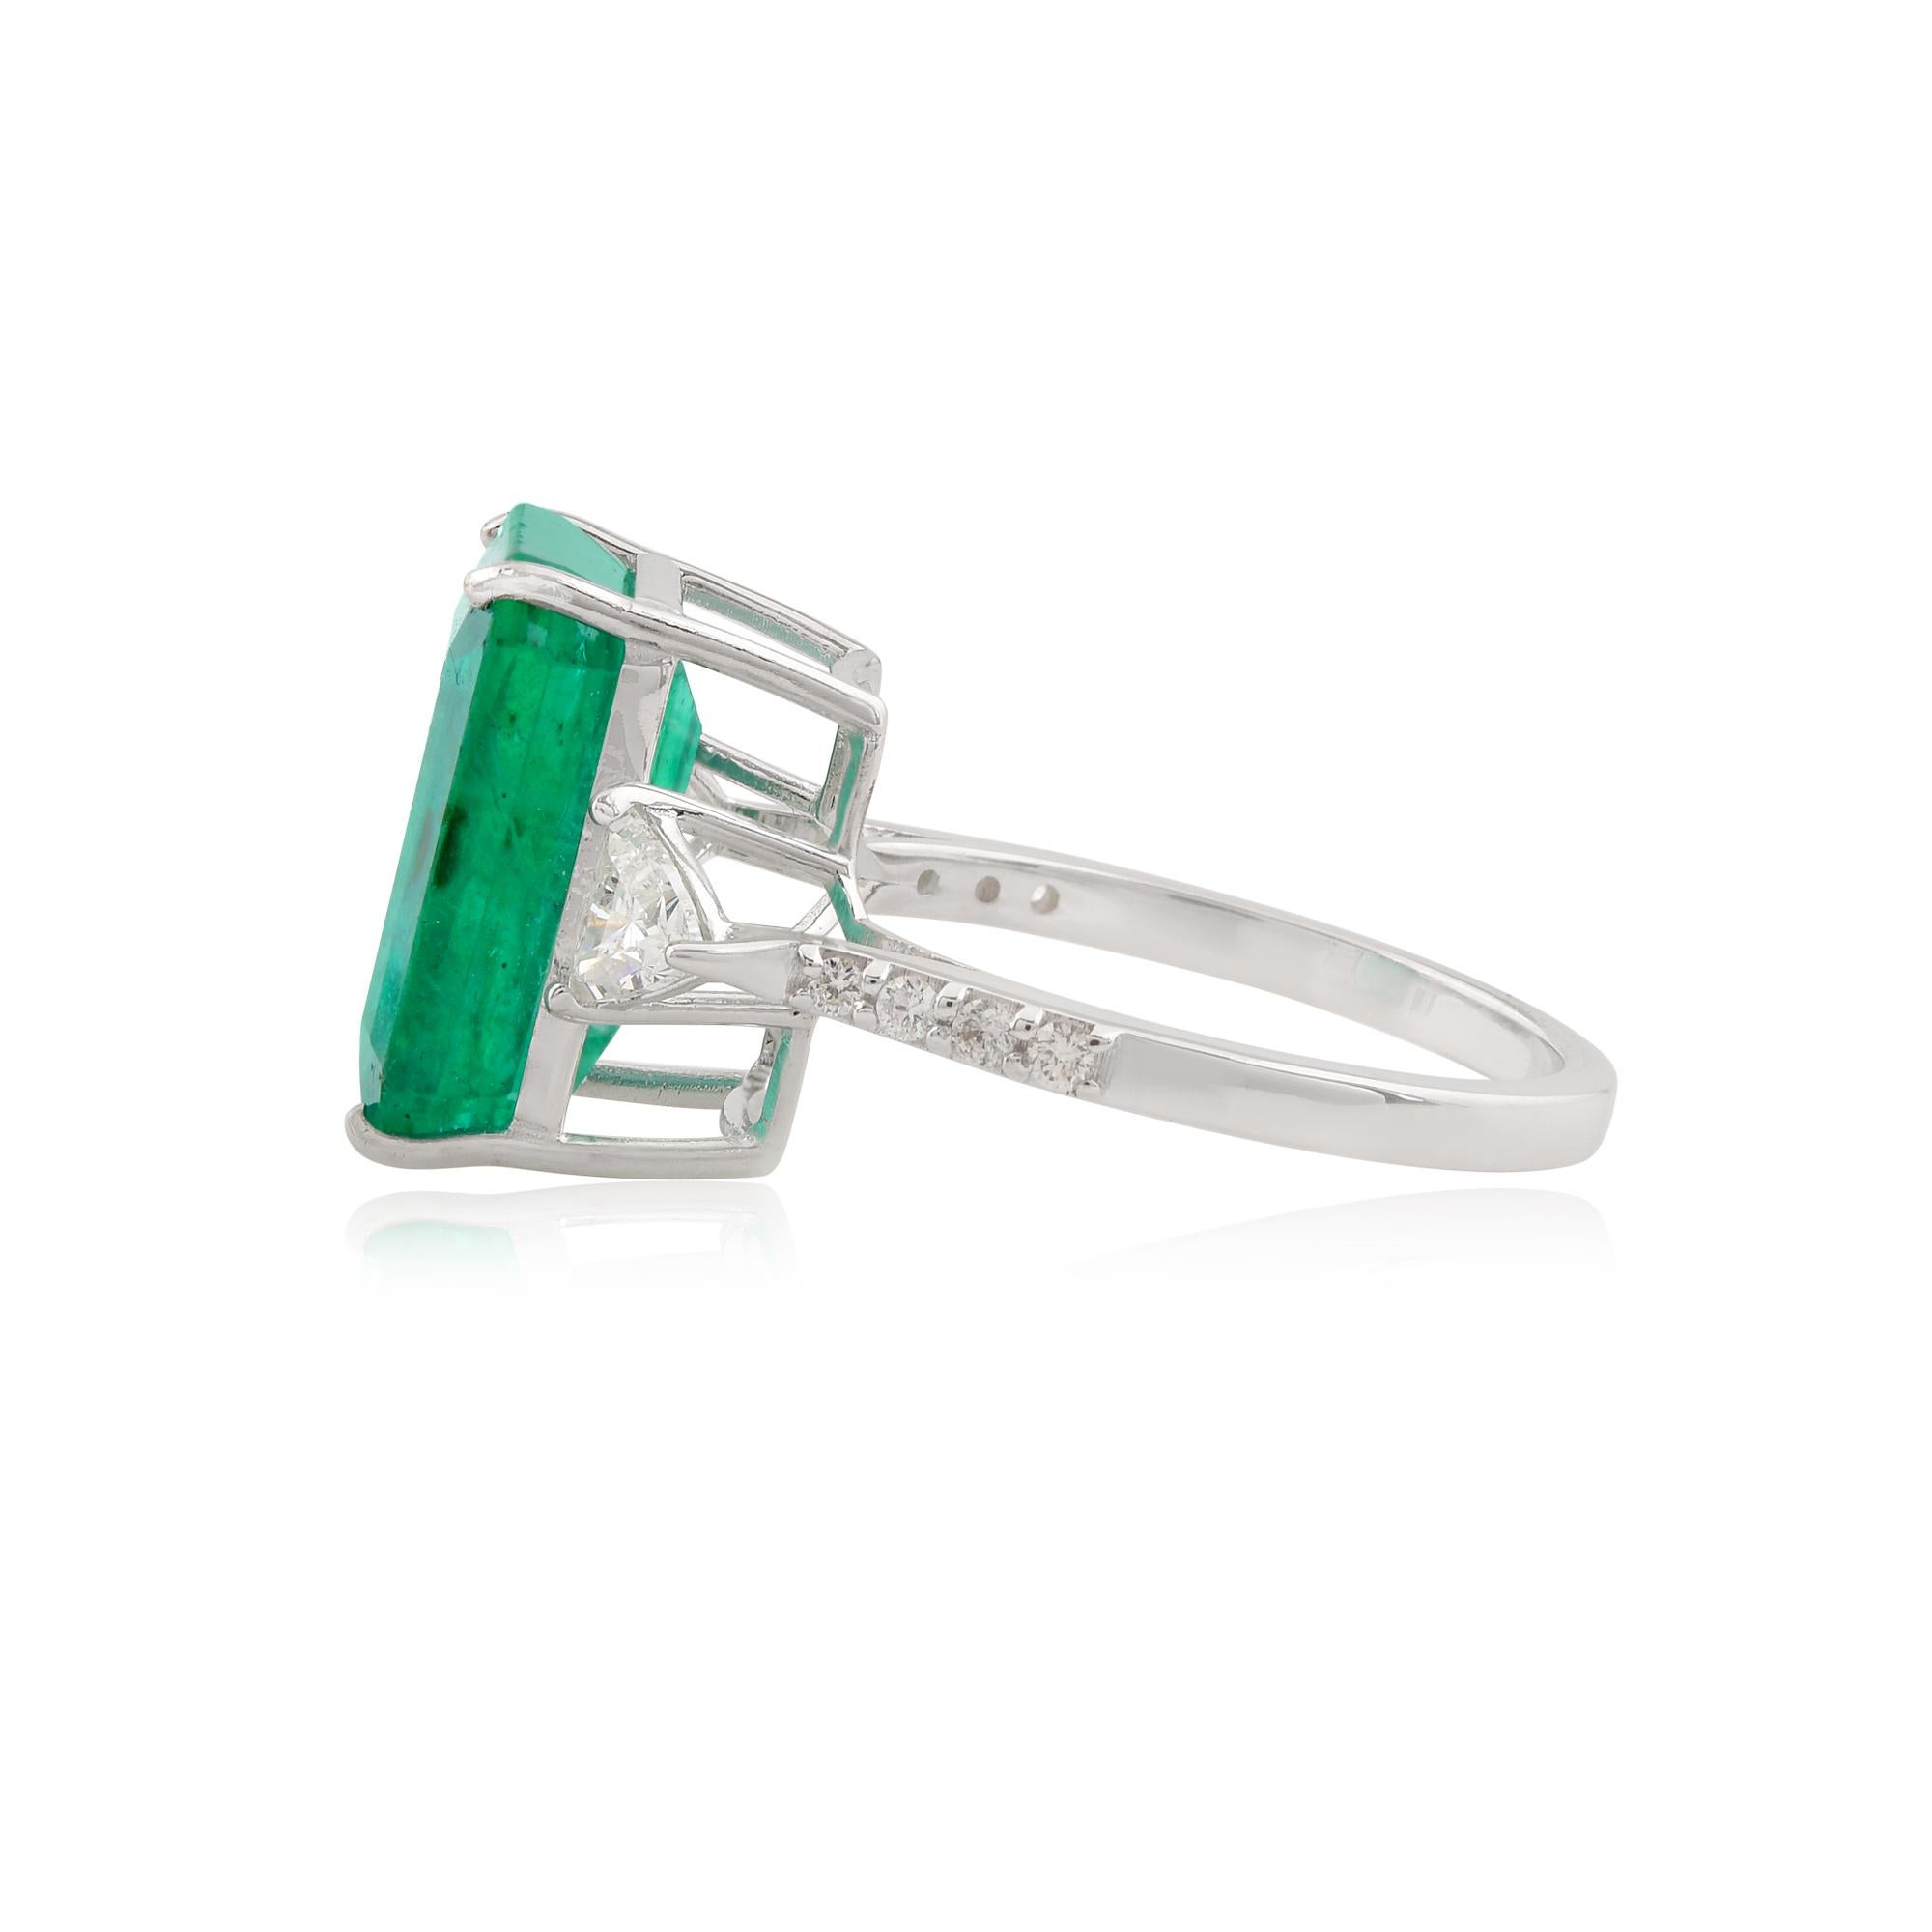 For Sale:  Natural Emerald Gemstone Ring Trillion Cut Diamond Solid 18k White Gold Jewelry 2